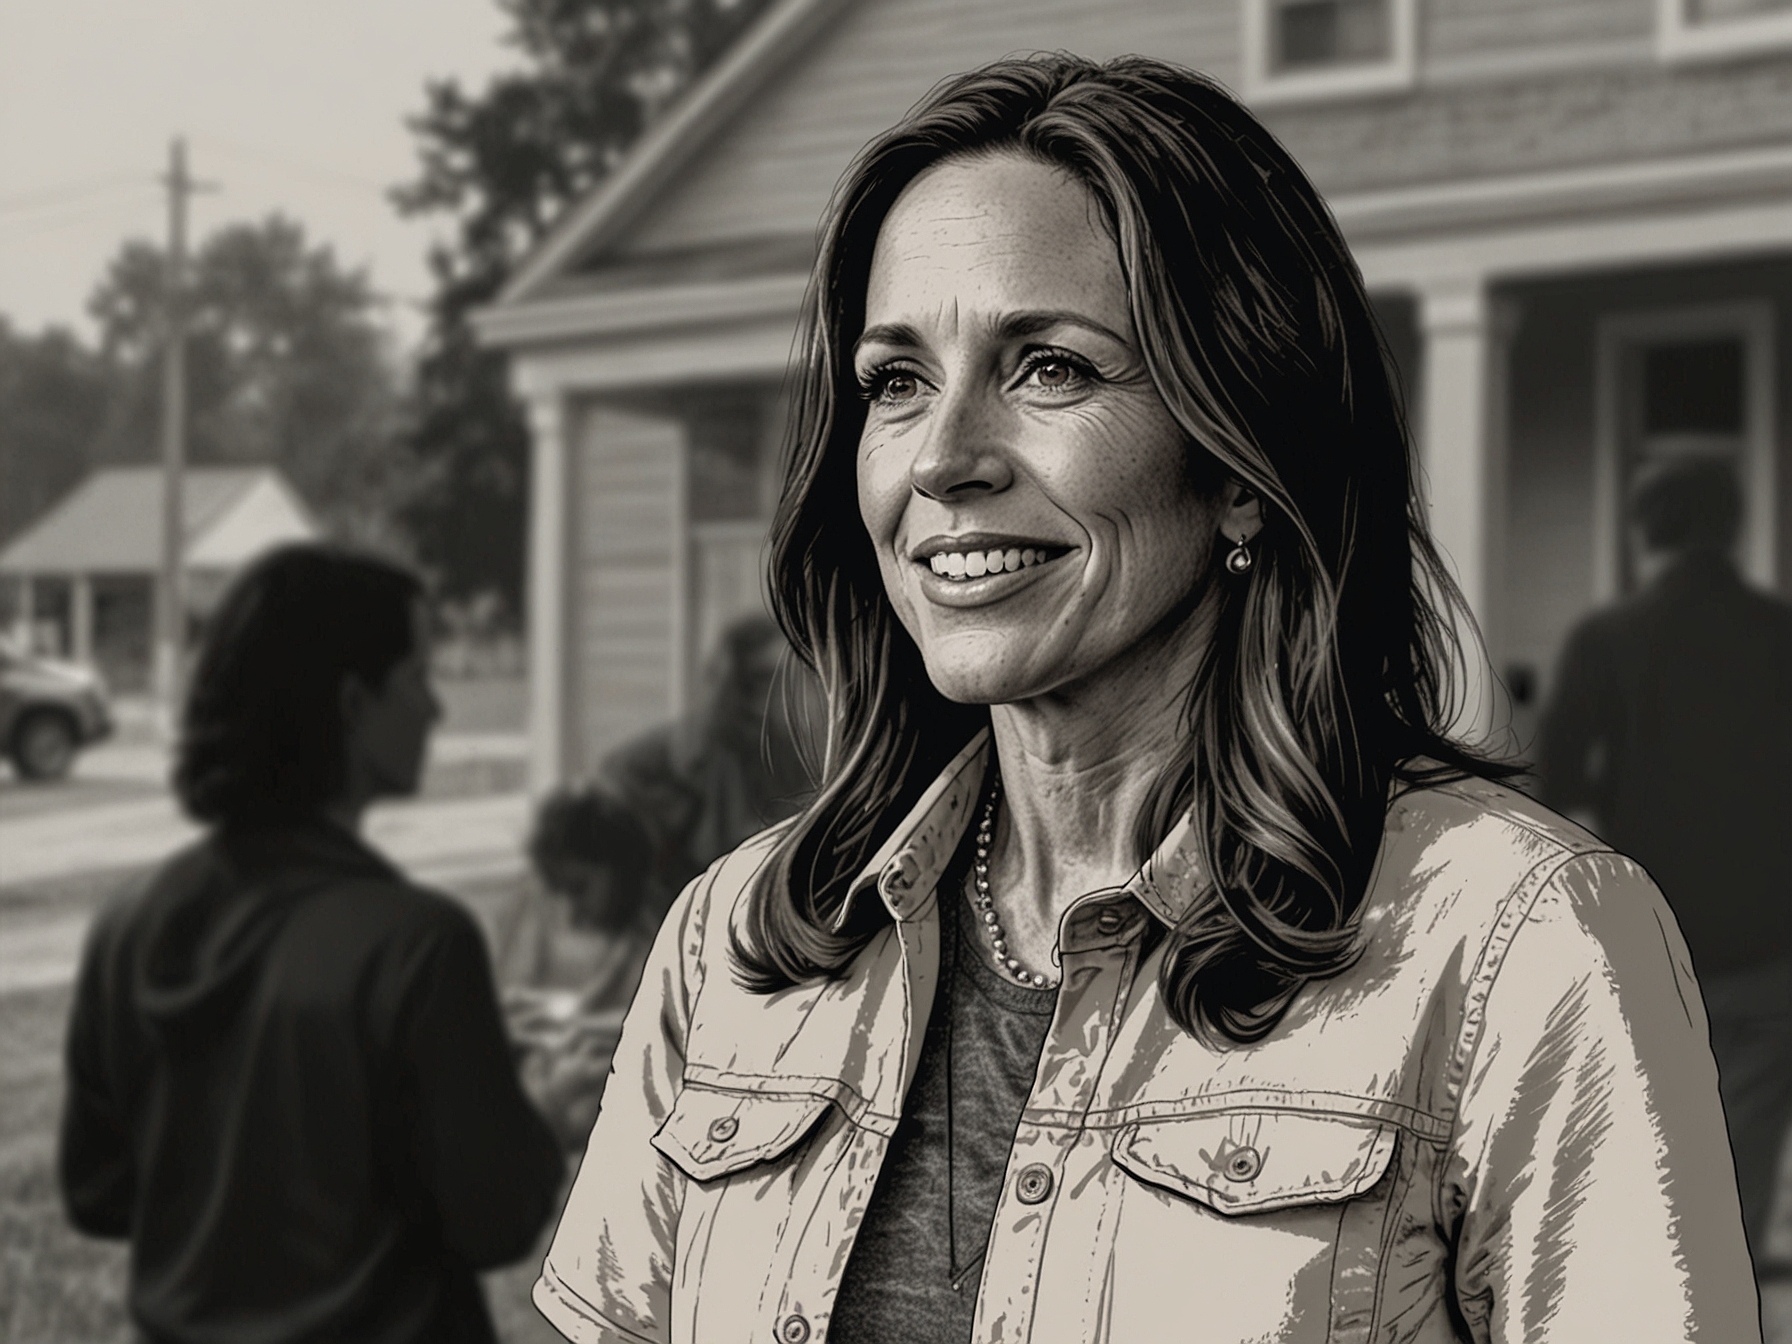 Congresswoman Lauren Boebert engages with voters in her new district, emphasizing grassroots efforts and voter engagement. The image showcases Boebert connecting with rural and small-town residents, highlighting her relatable approach.